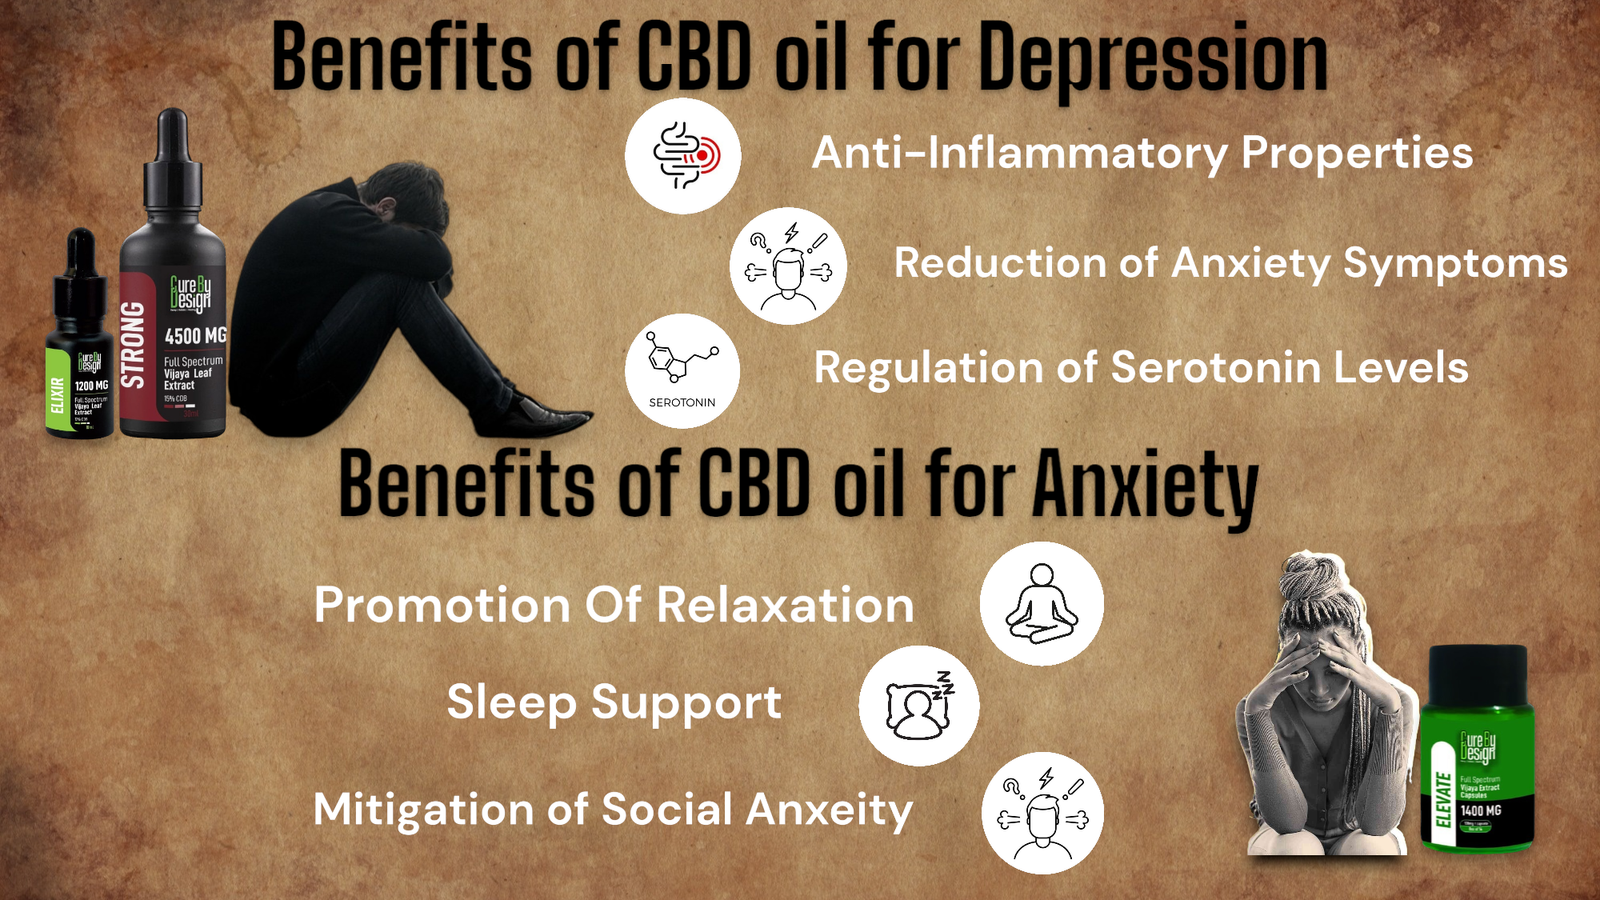 Benefits of CBD Oil for Depression and Anxiety